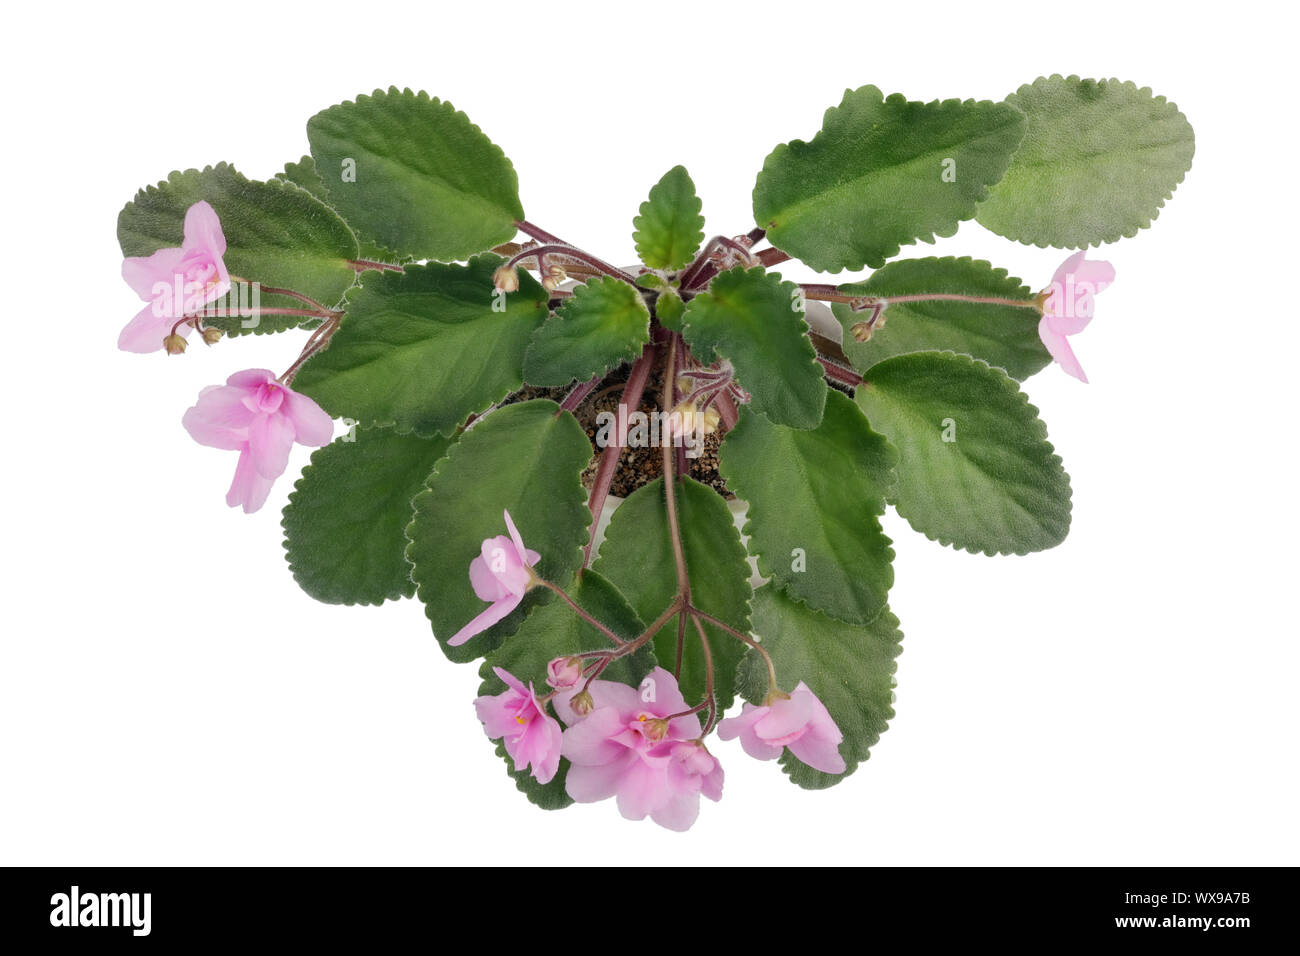 Indoor Violets flower bush as heart shape isolated Stock Photo